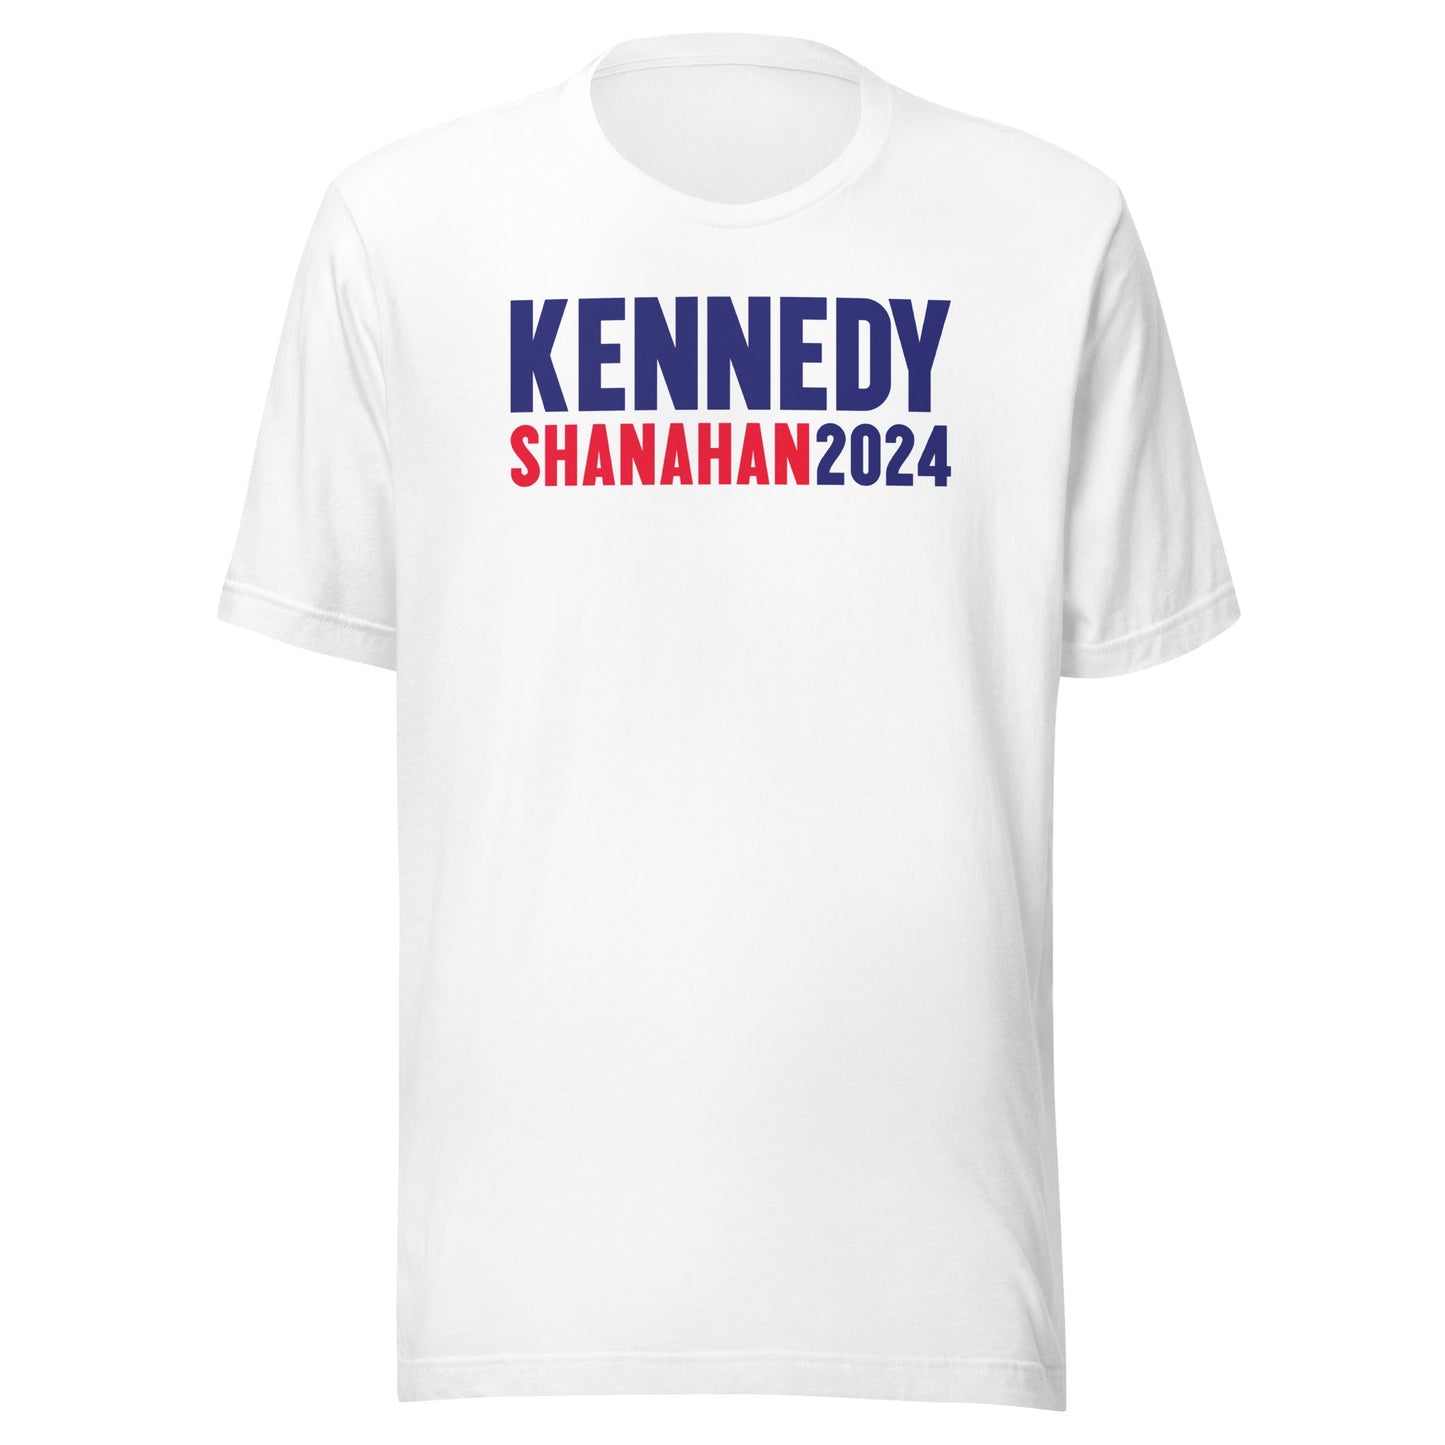 Kennedy x Shanahan Unisex Tee - TEAM KENNEDY. All rights reserved